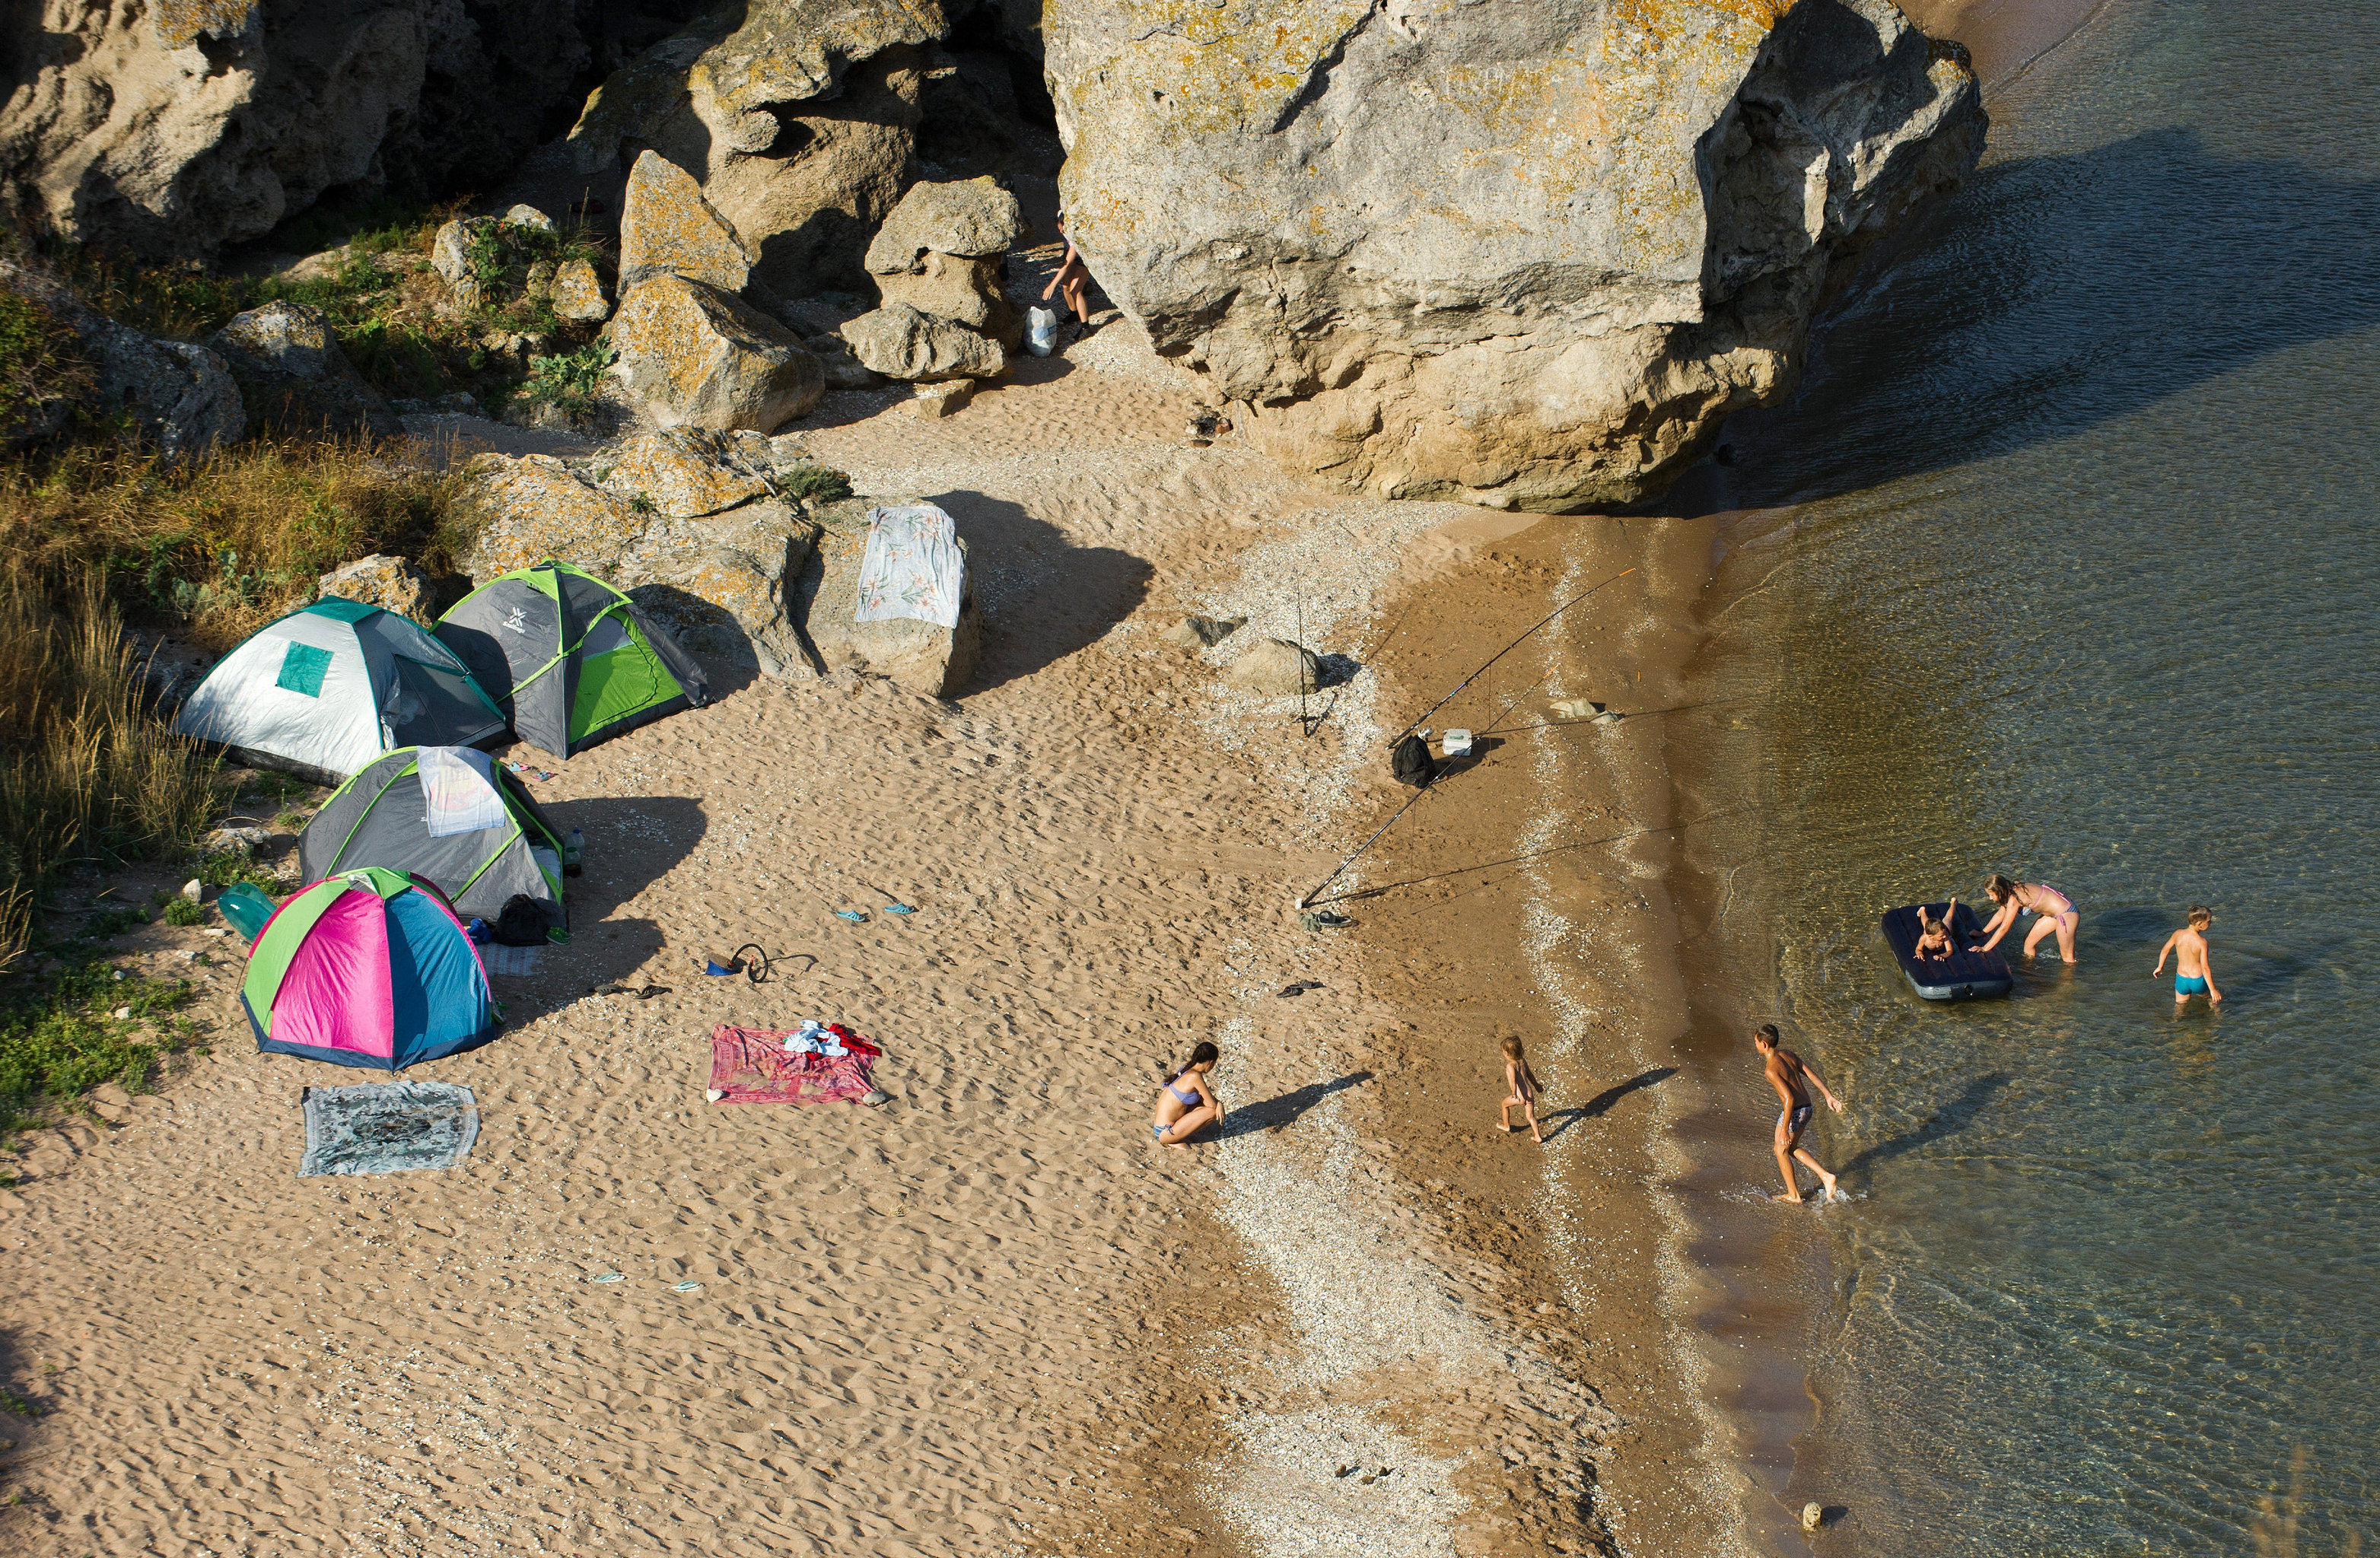 Vacationers by the rocks of the Generalskiye beaches